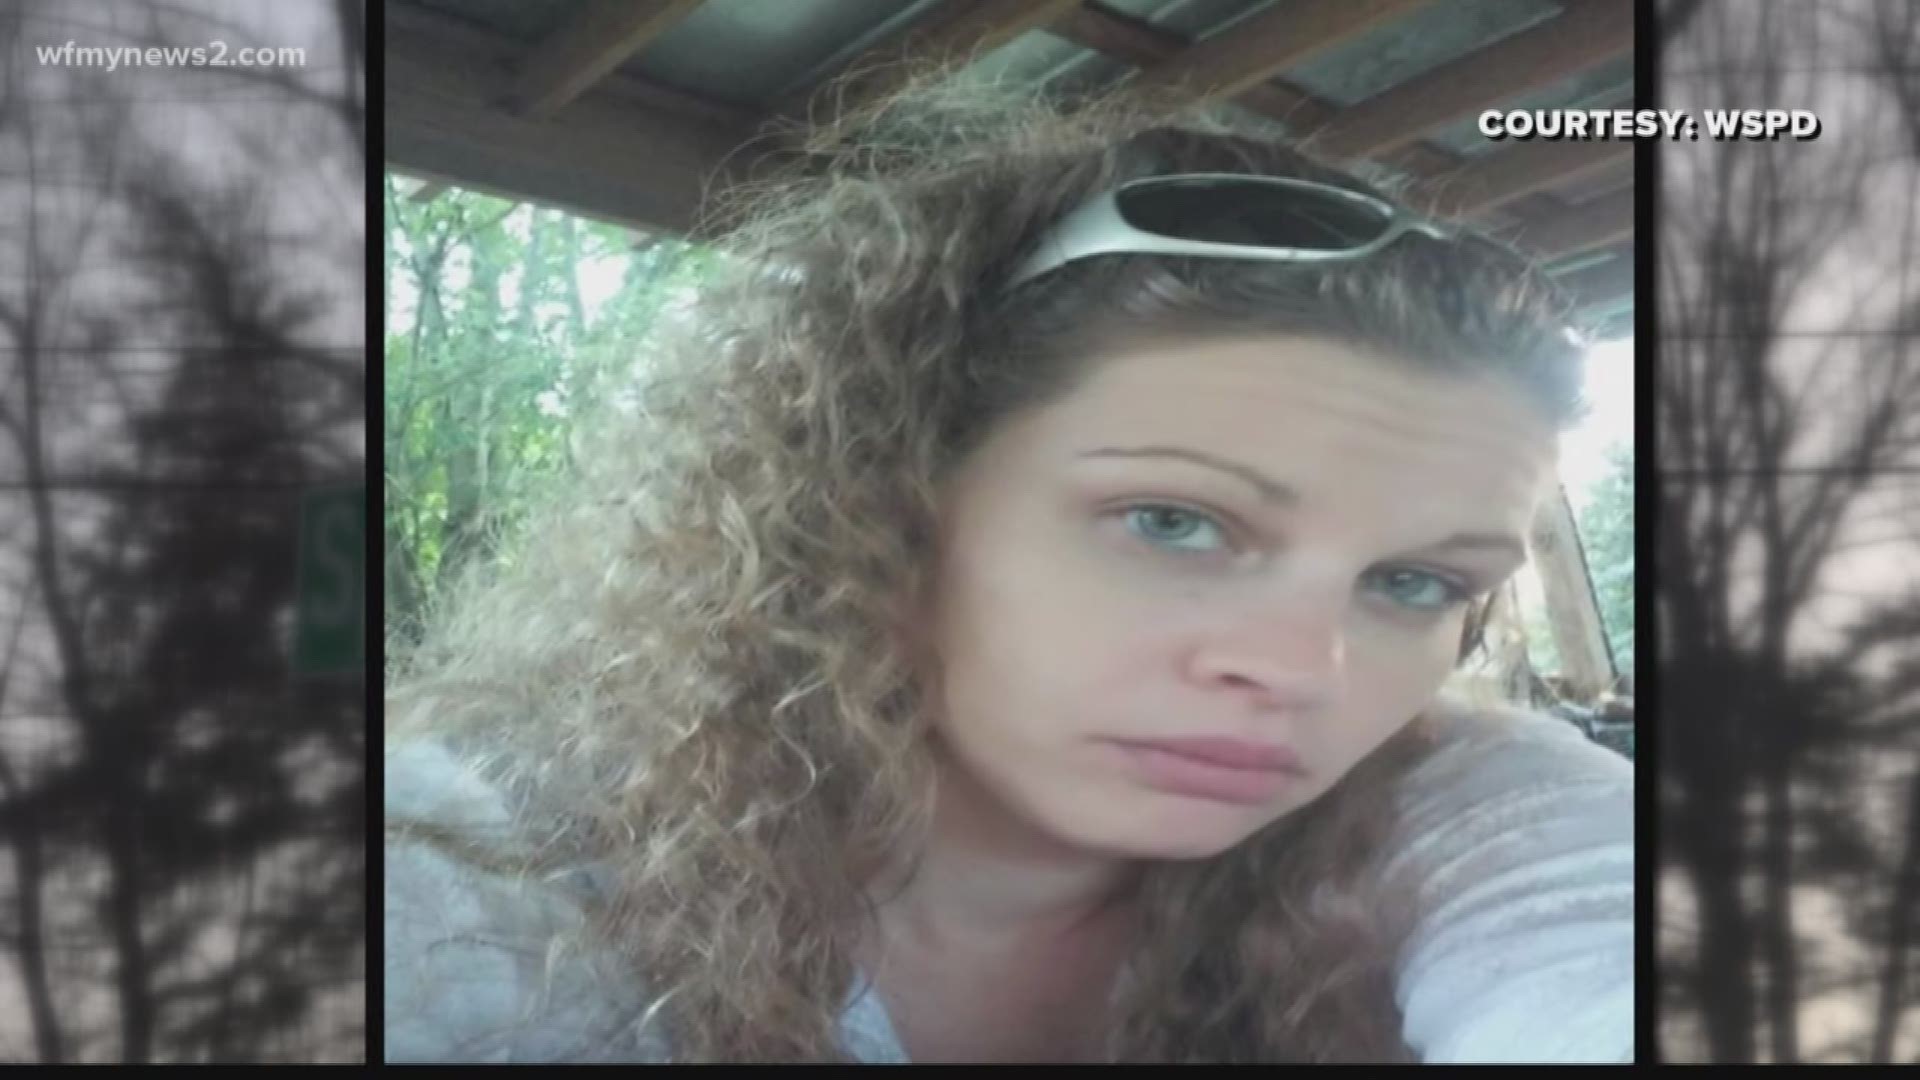 Her daughter, Kristen McNeal, has been missing for nearly 2 weeks.